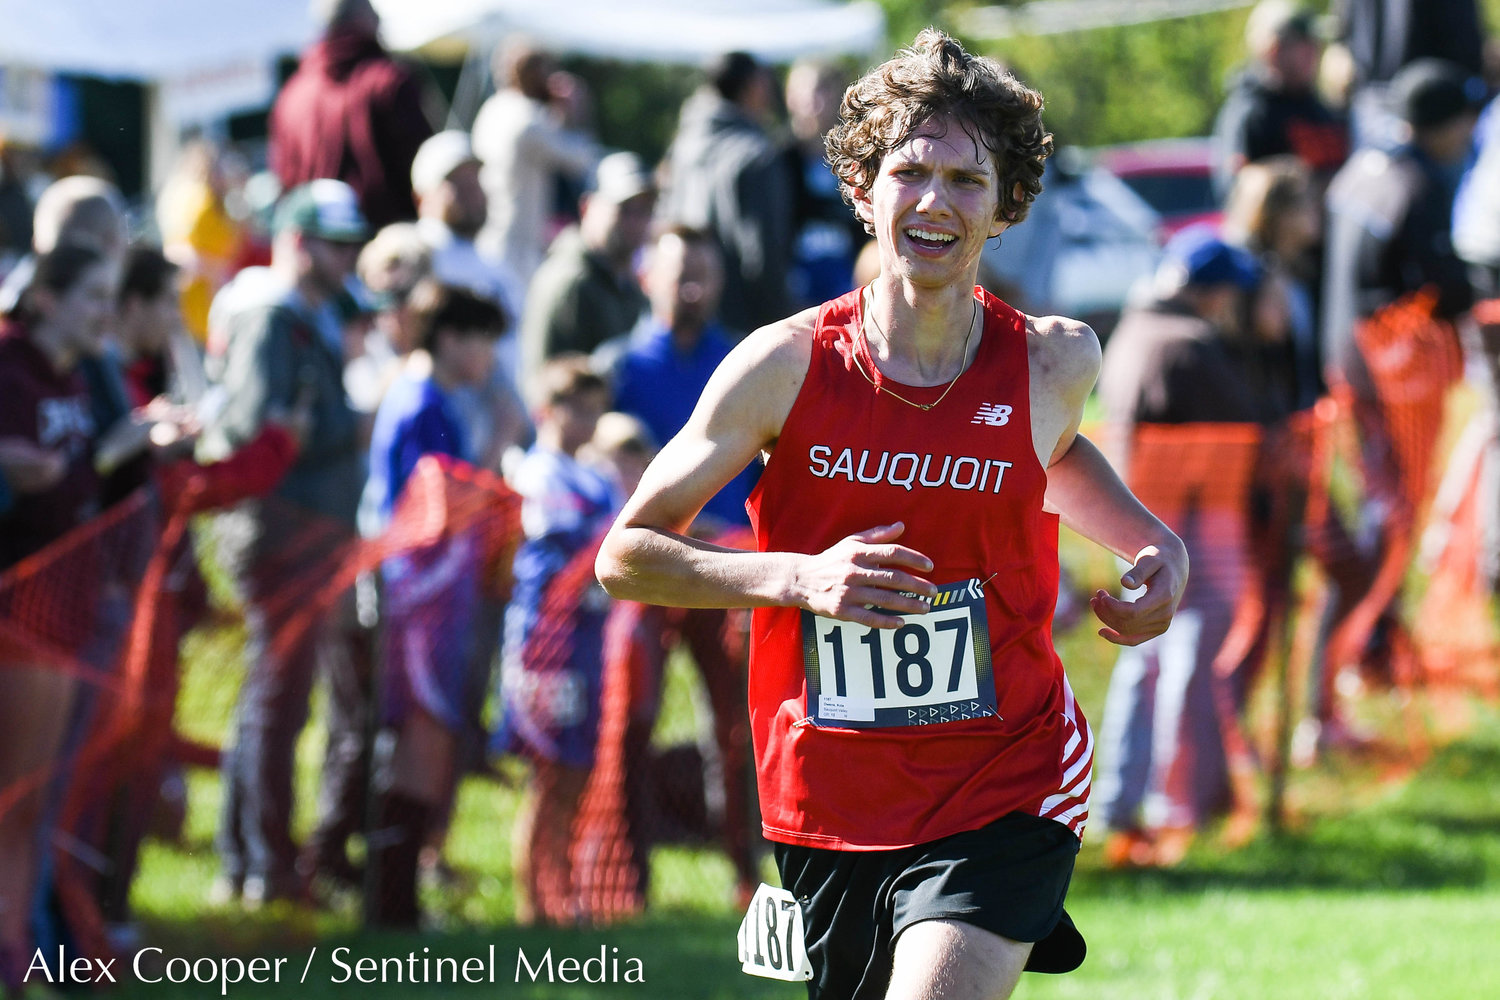 Sauquoit runner Kole Owens finishes in third place place for varsity small schools during the 79th EJ Herrmann XC Invitational on Saturday, Sept. 24 at Proctor Park in Utica.